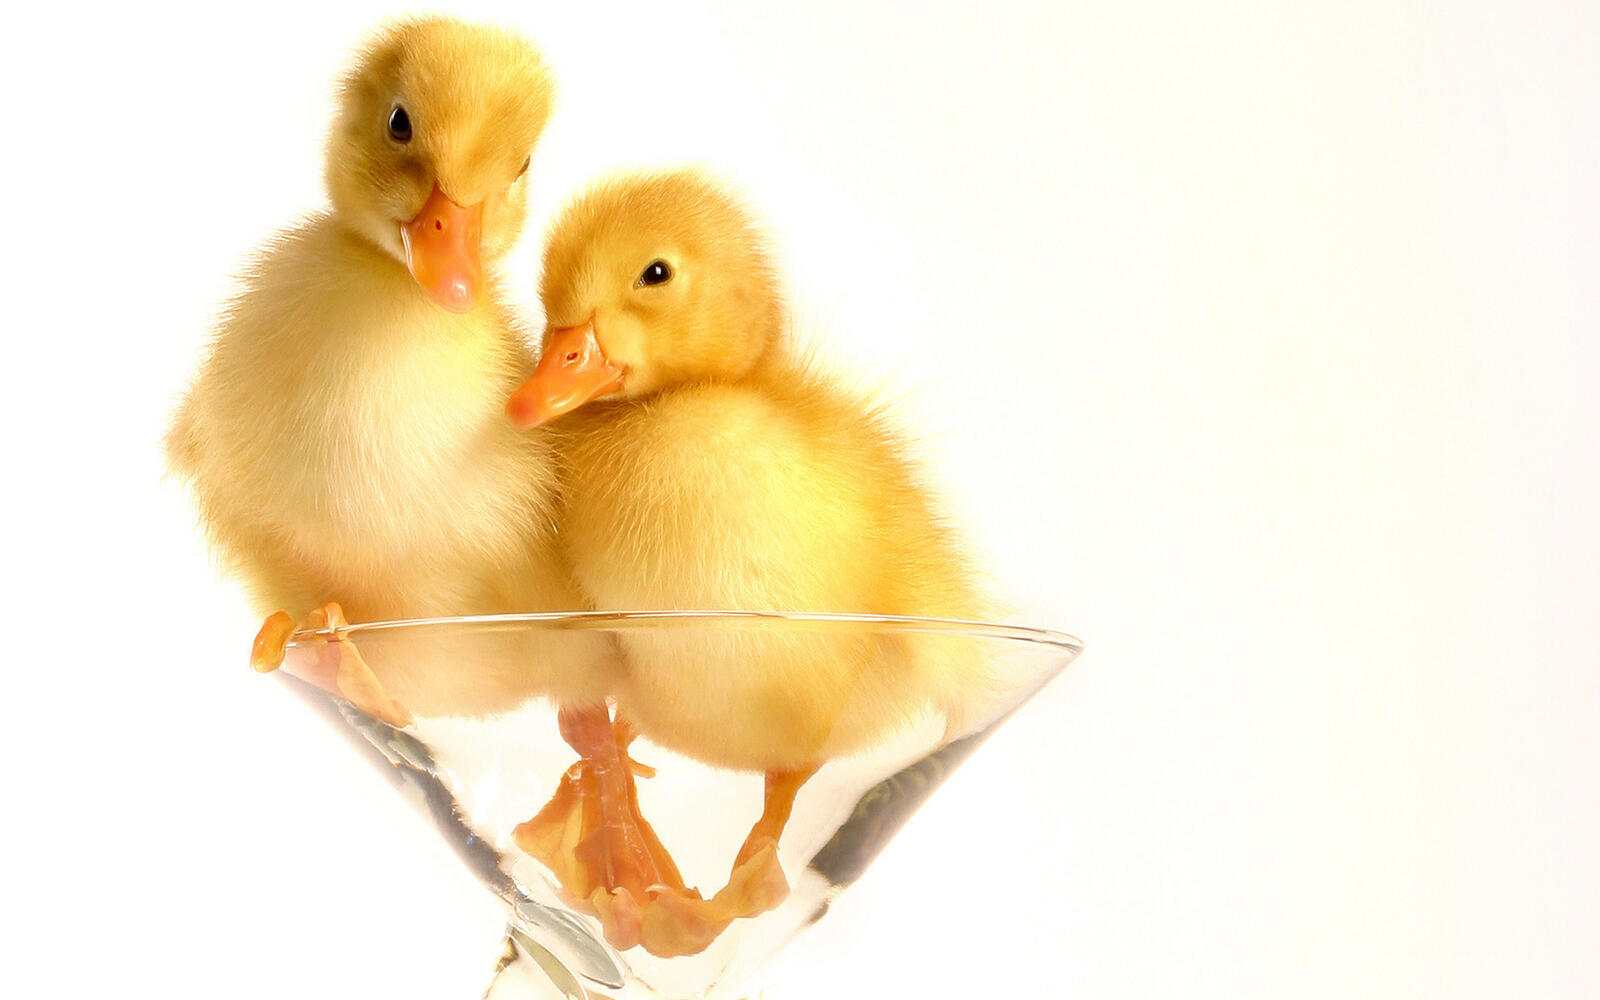 Wallpapers glass ducklings couple on the desktop